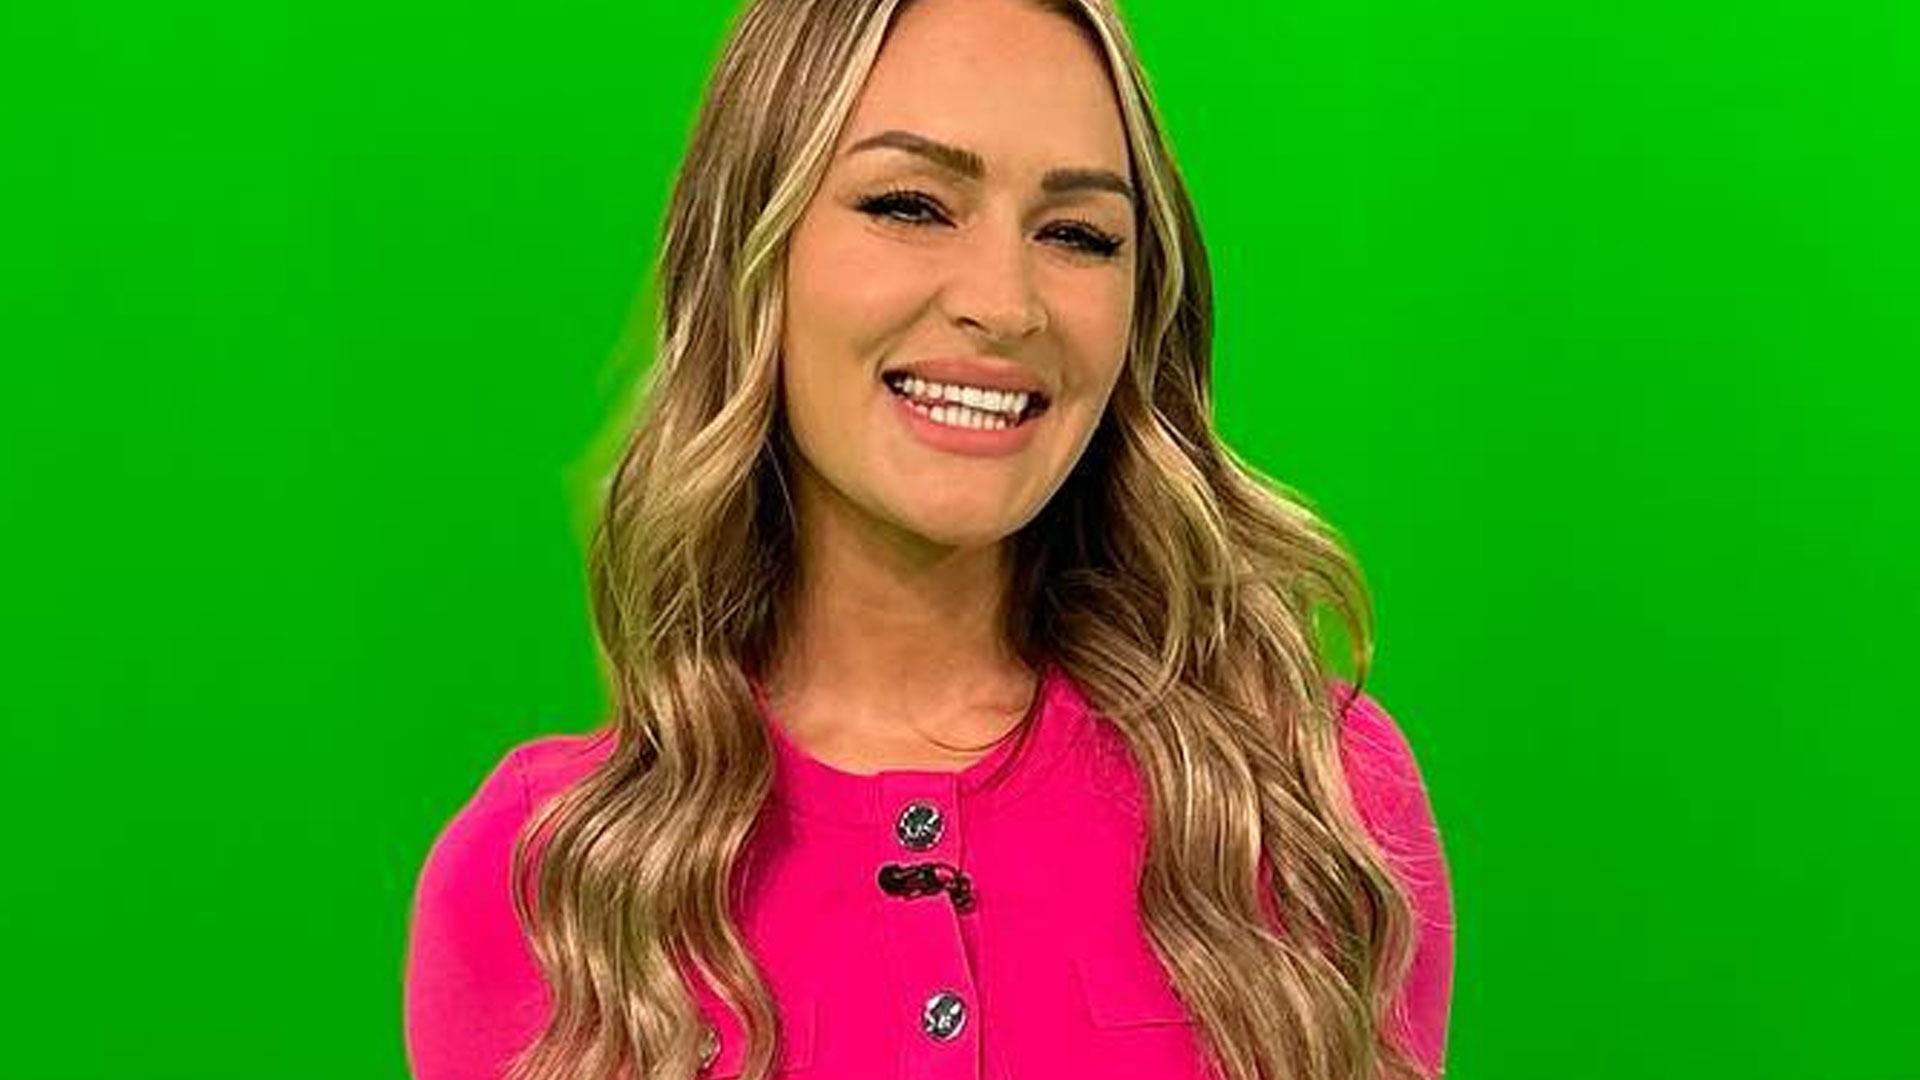 Laura Woods leaves fans stunned with bold outfit for ITV coverage of Women's World Cup final as they call her 'gorgeous'